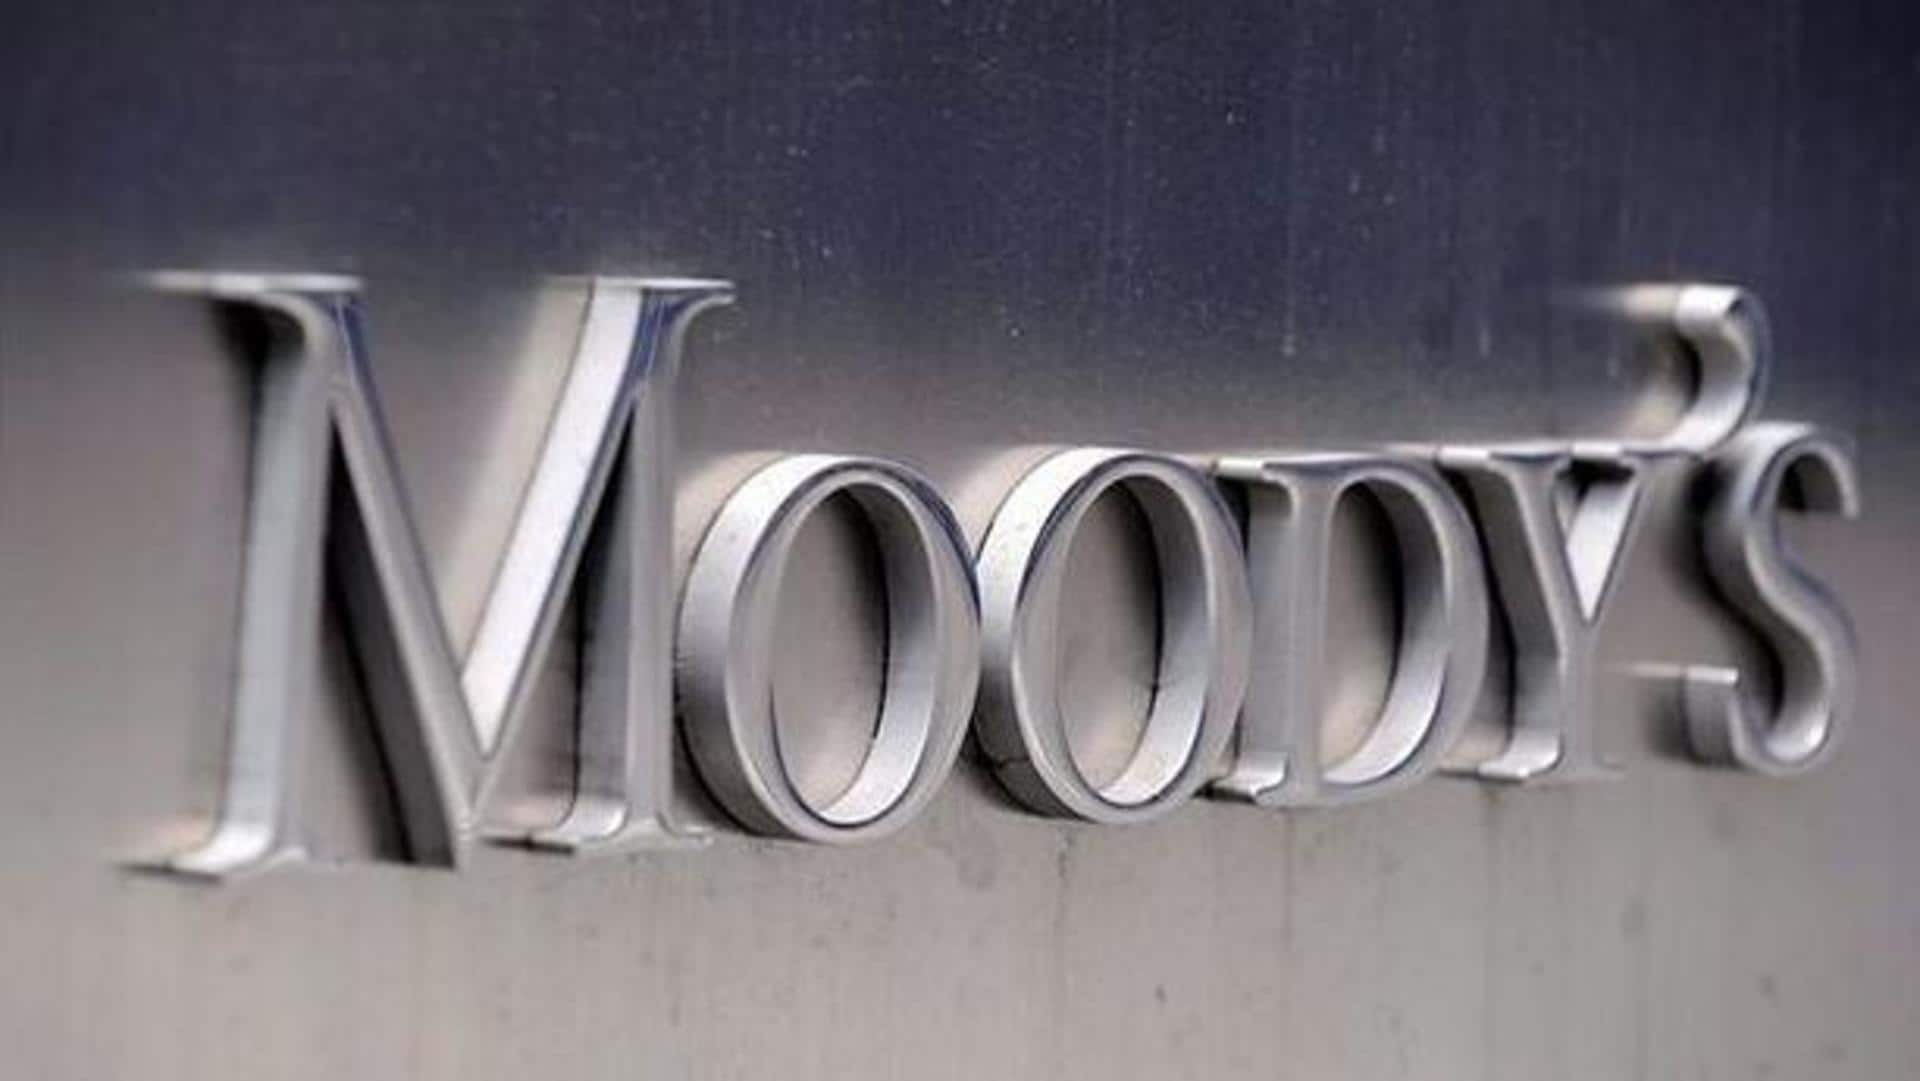 Moody's is bullish on India's growth despite the declining GDP